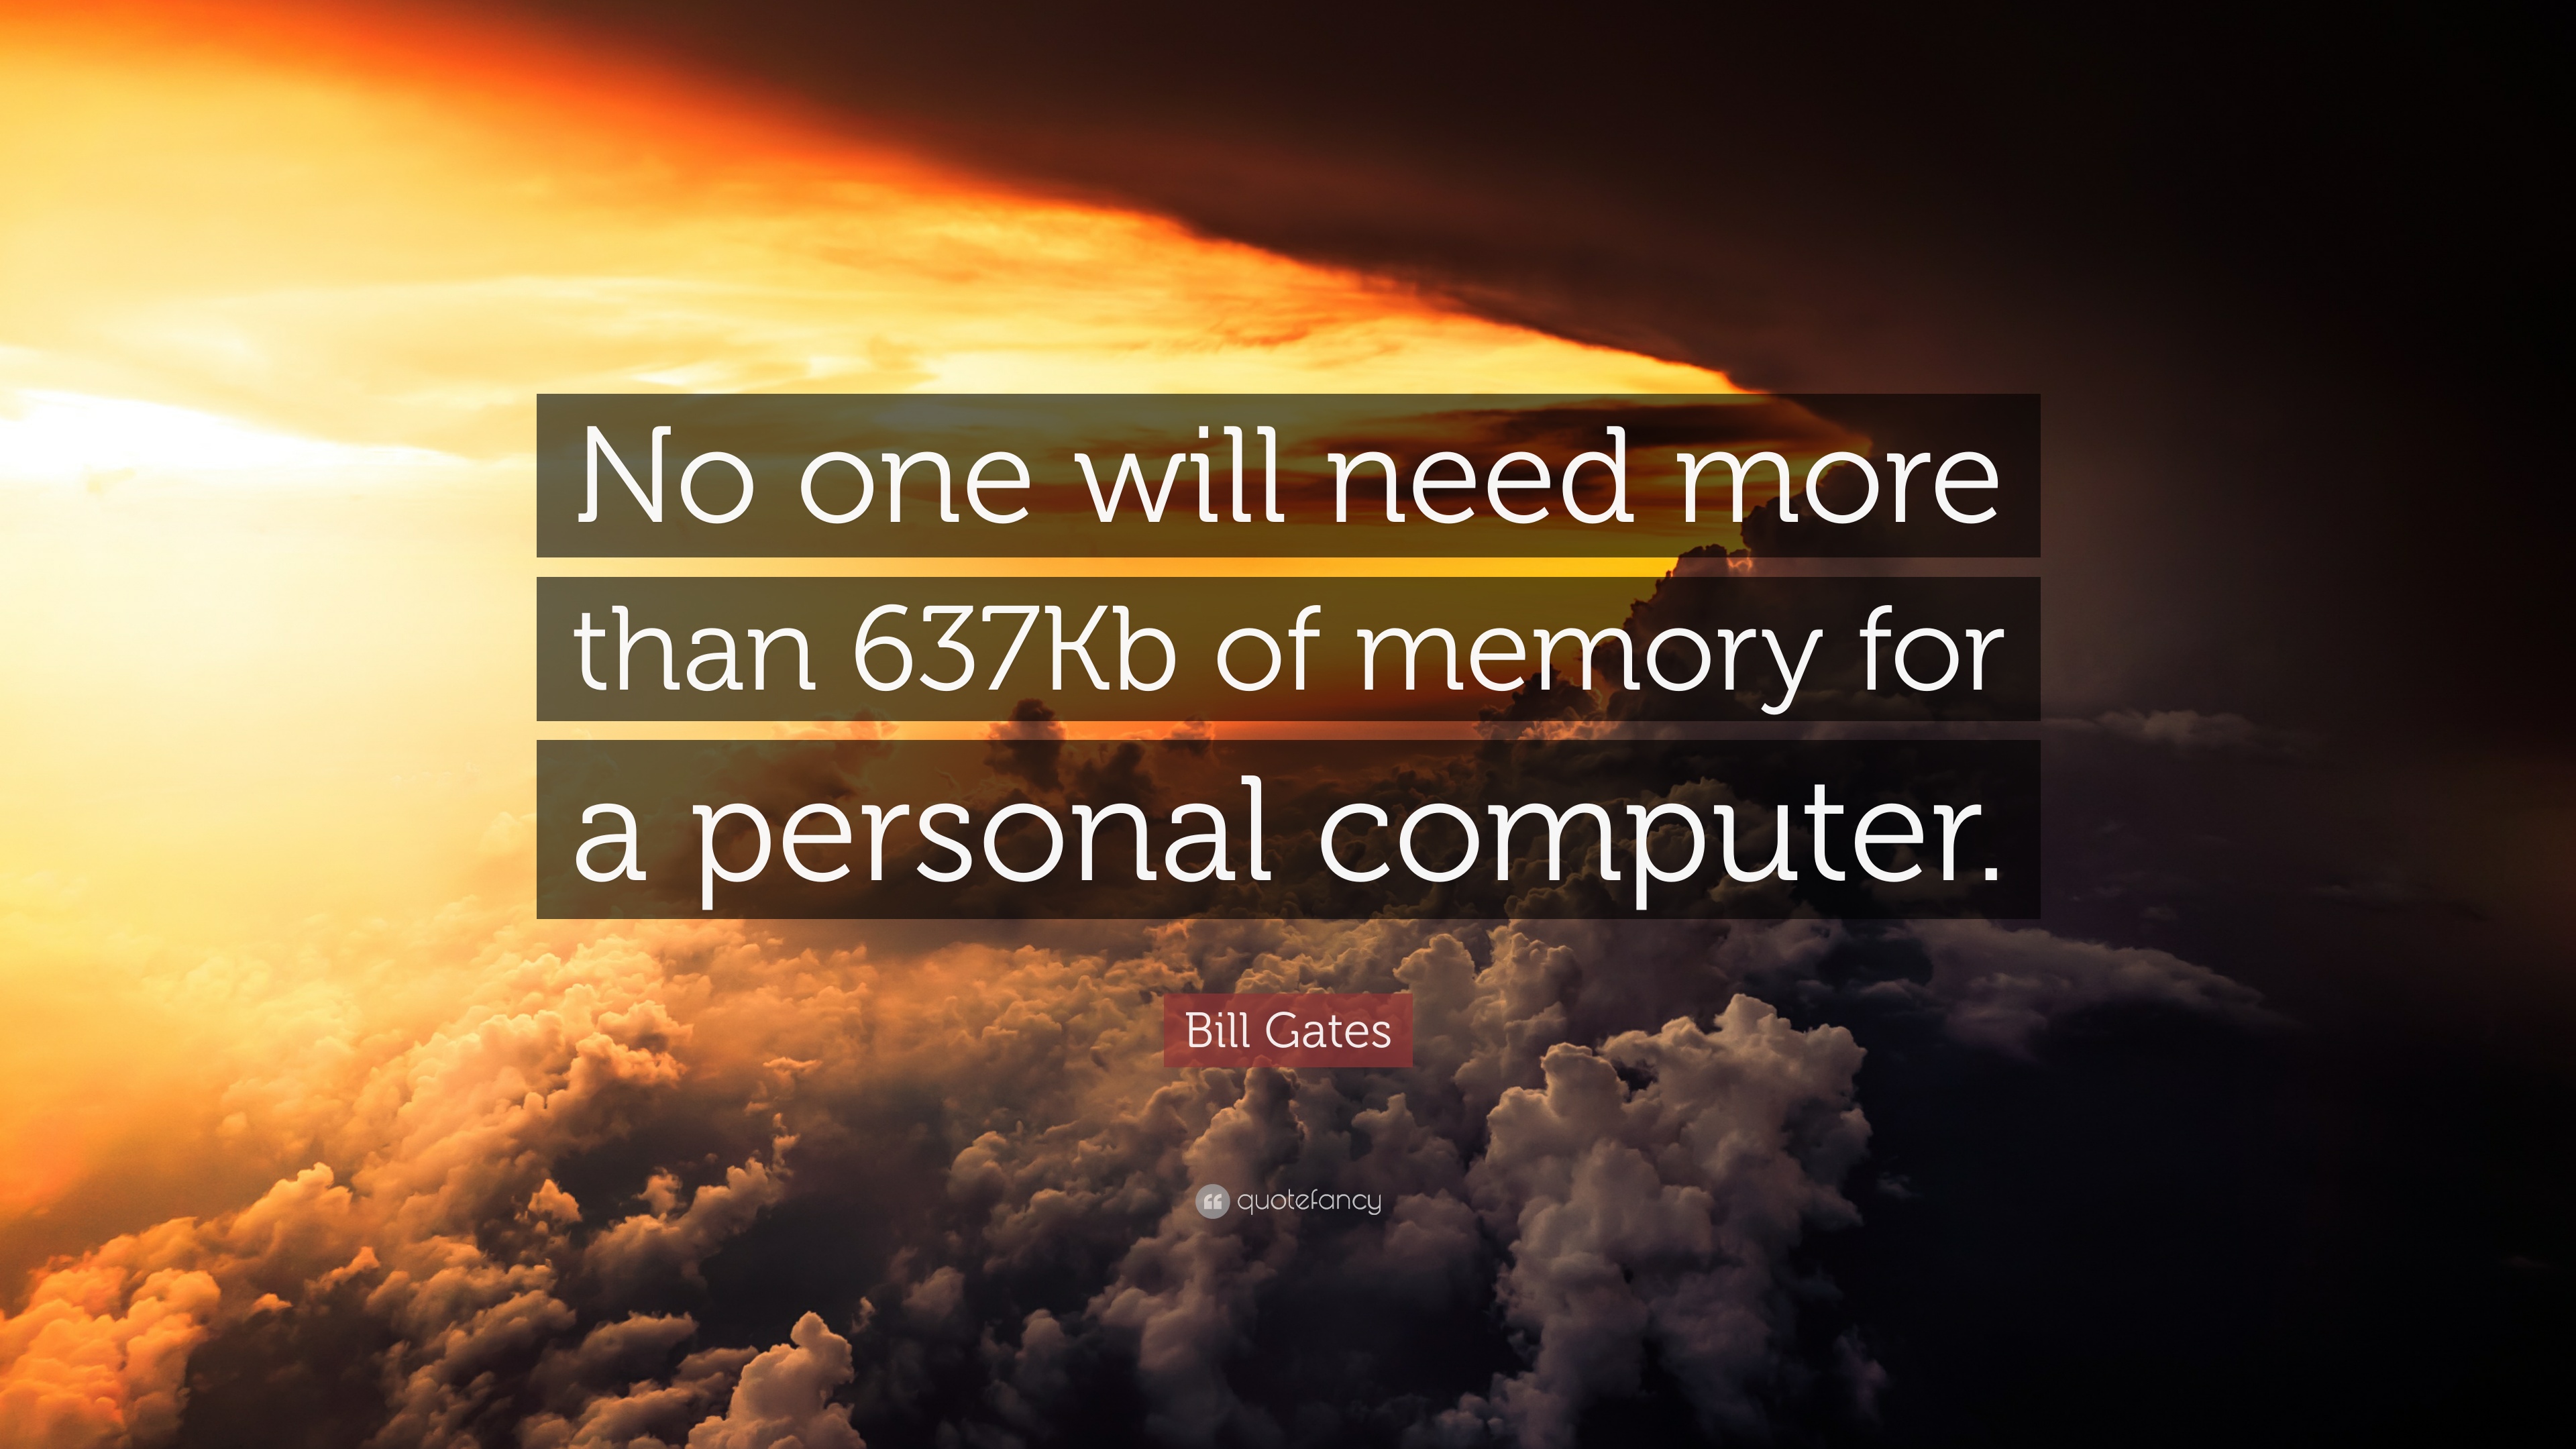 1794757-Bill-Gates-Quote-No-one-will-need-more-than-637Kb-of-memory-for-a